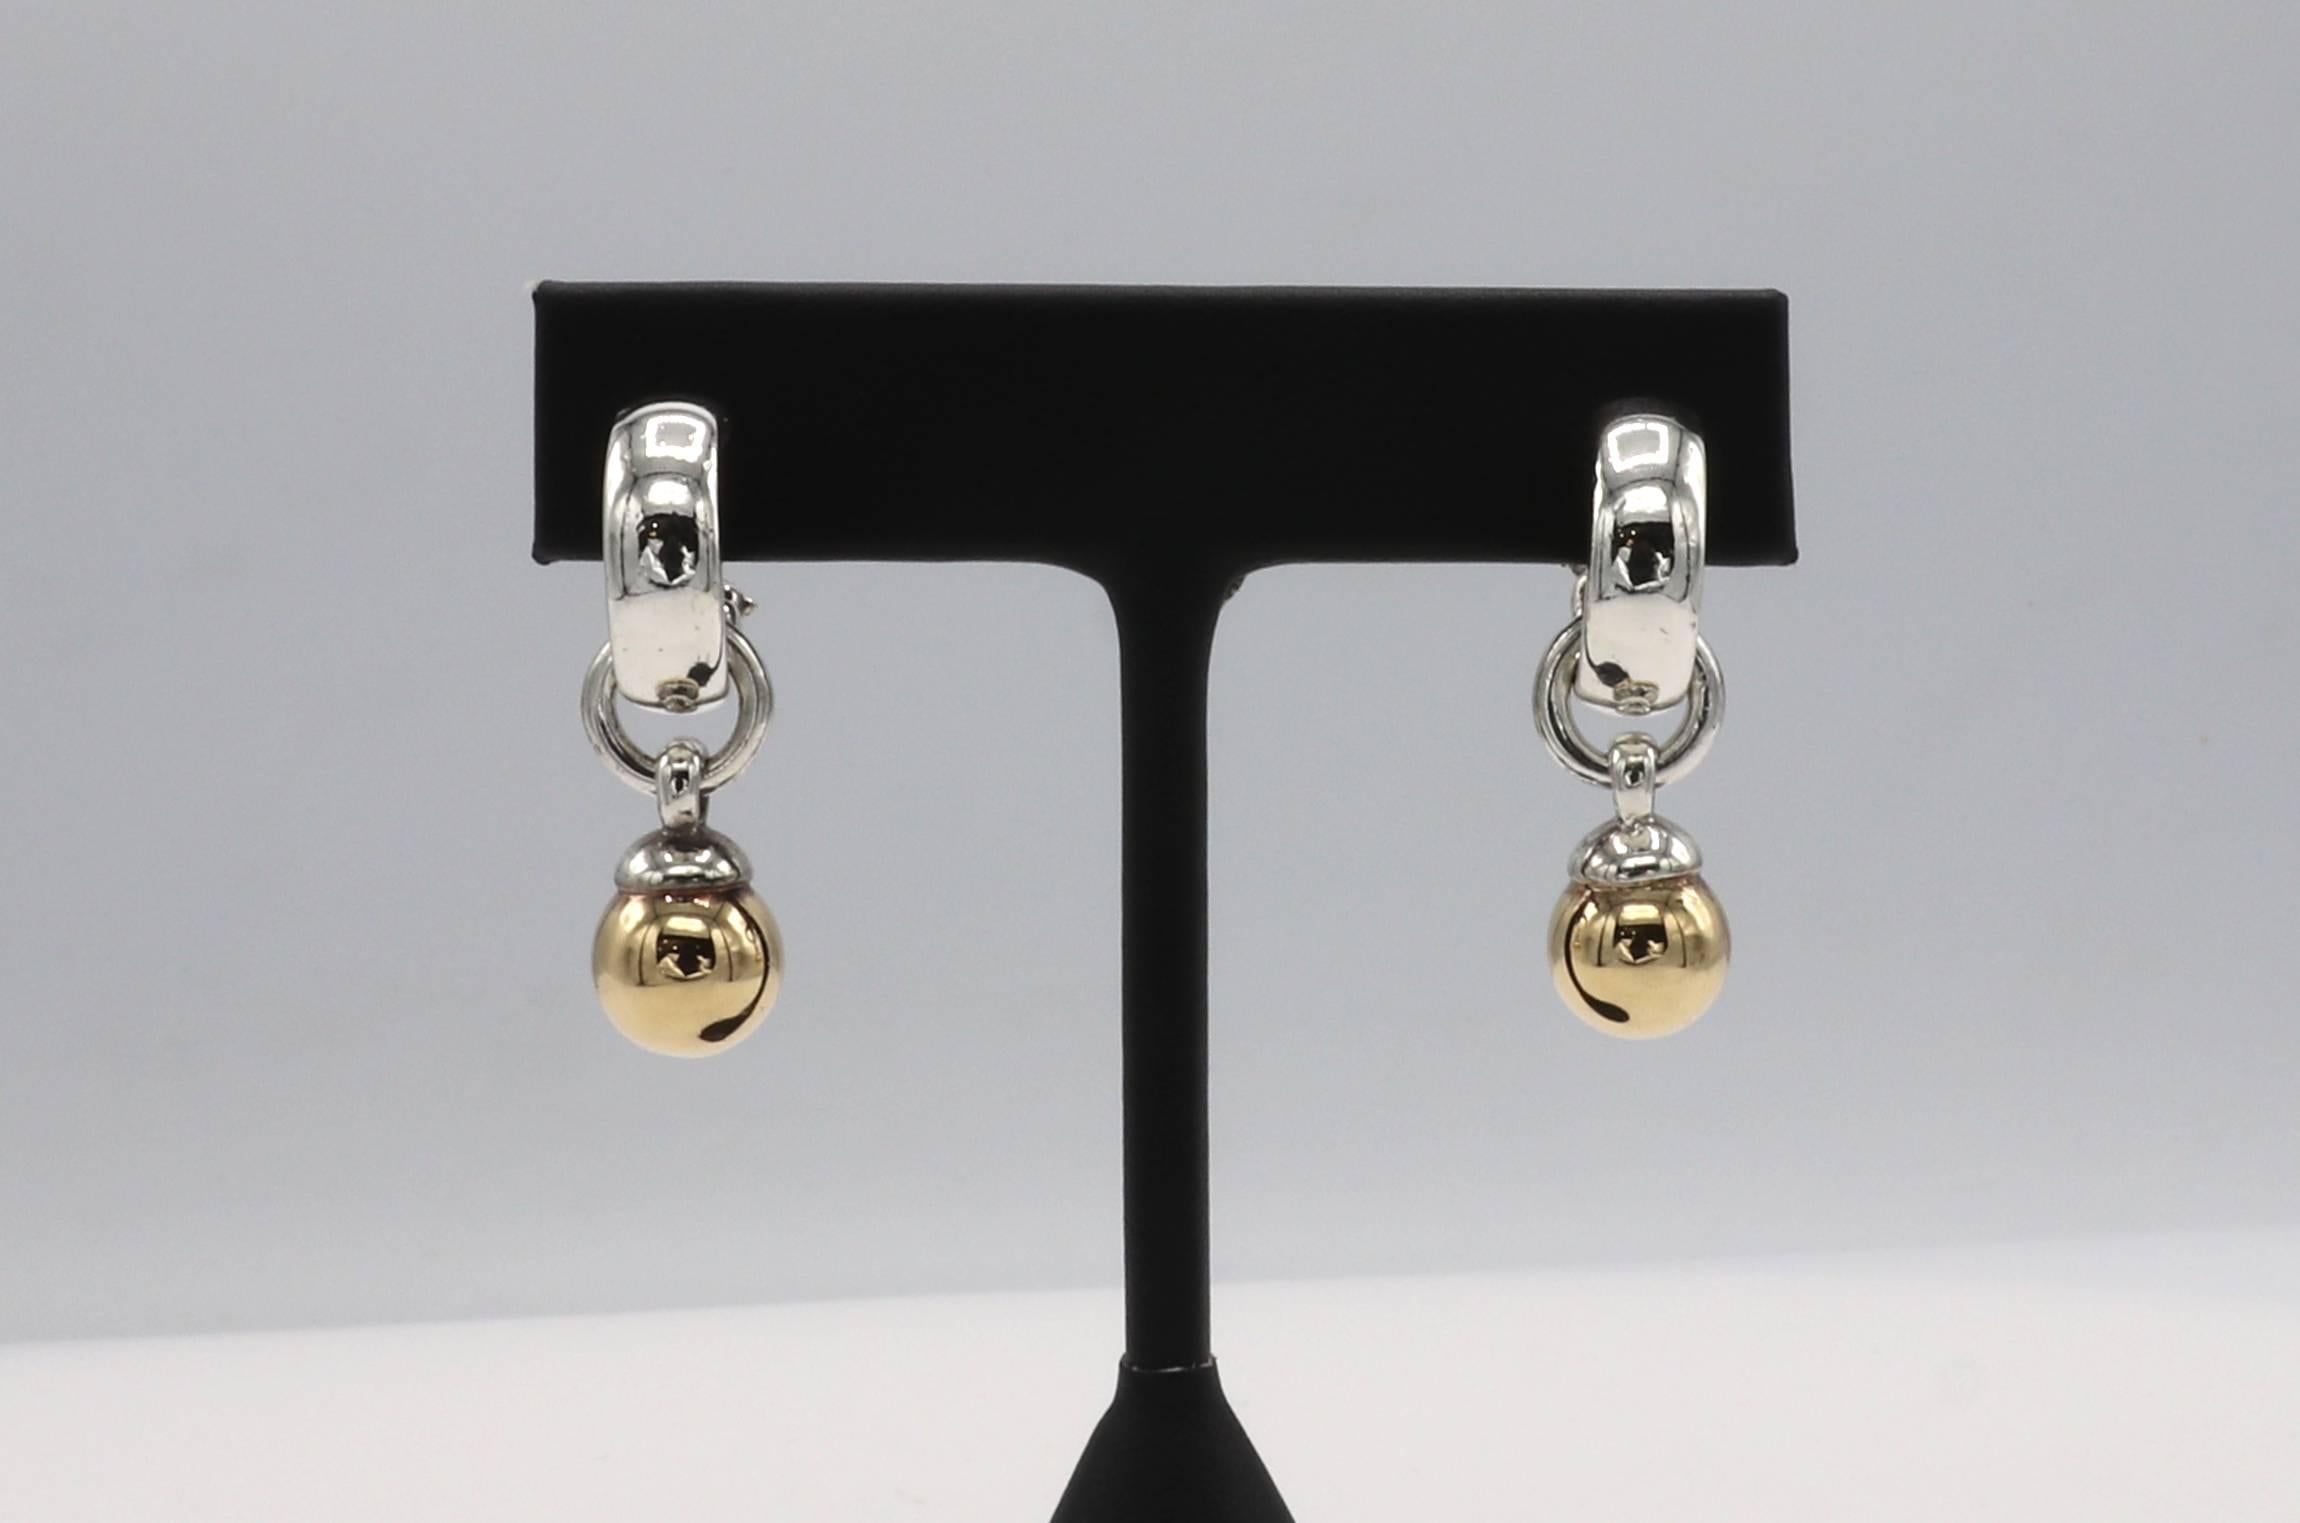 Tiffany & Co. Sterling Silver & 18K Gold Detachable Ball Hoop Earrings
Metal: Sterling silver & 18k yellow gold
Weight: 11.54 grams
Length: 31.5mm  (with drop)
Hoops: 16mm diameter 
Width: 5.5mm
Signed: Tiffany & Co. 1995 750 925 